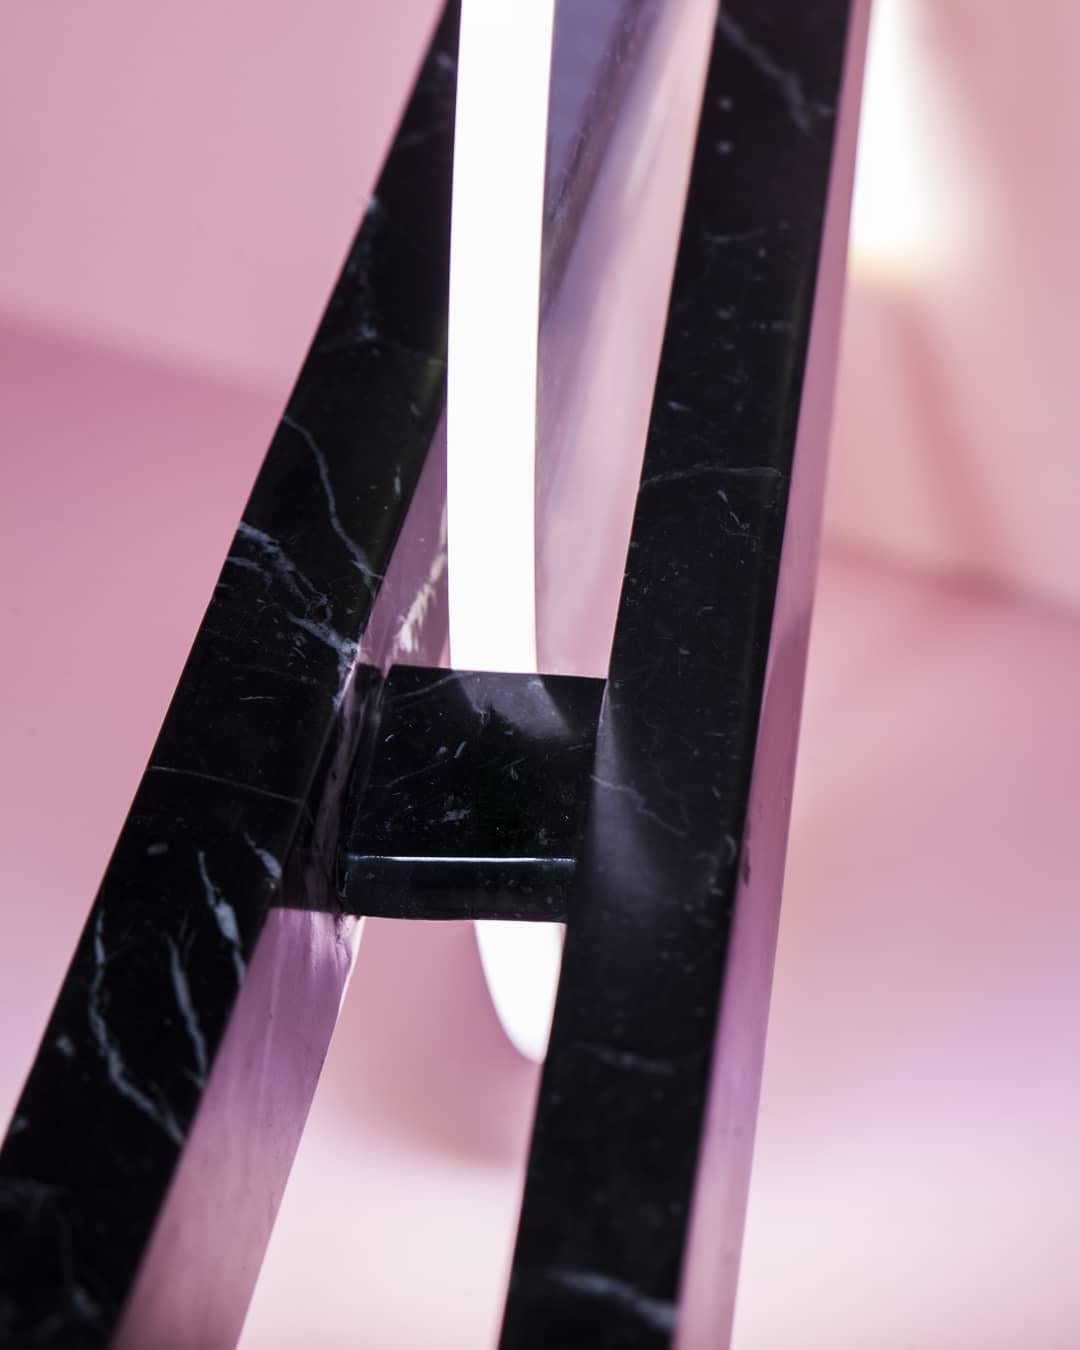 Radial, glass and marble table lamp by Carlos Aucejo
Dimensions: 65 x 35 x 10 cm
Materials: Glass and marble, (Marquina or Carrara).
This piece represents the interaction of the object with the space. It is opposite to the other pieces which it